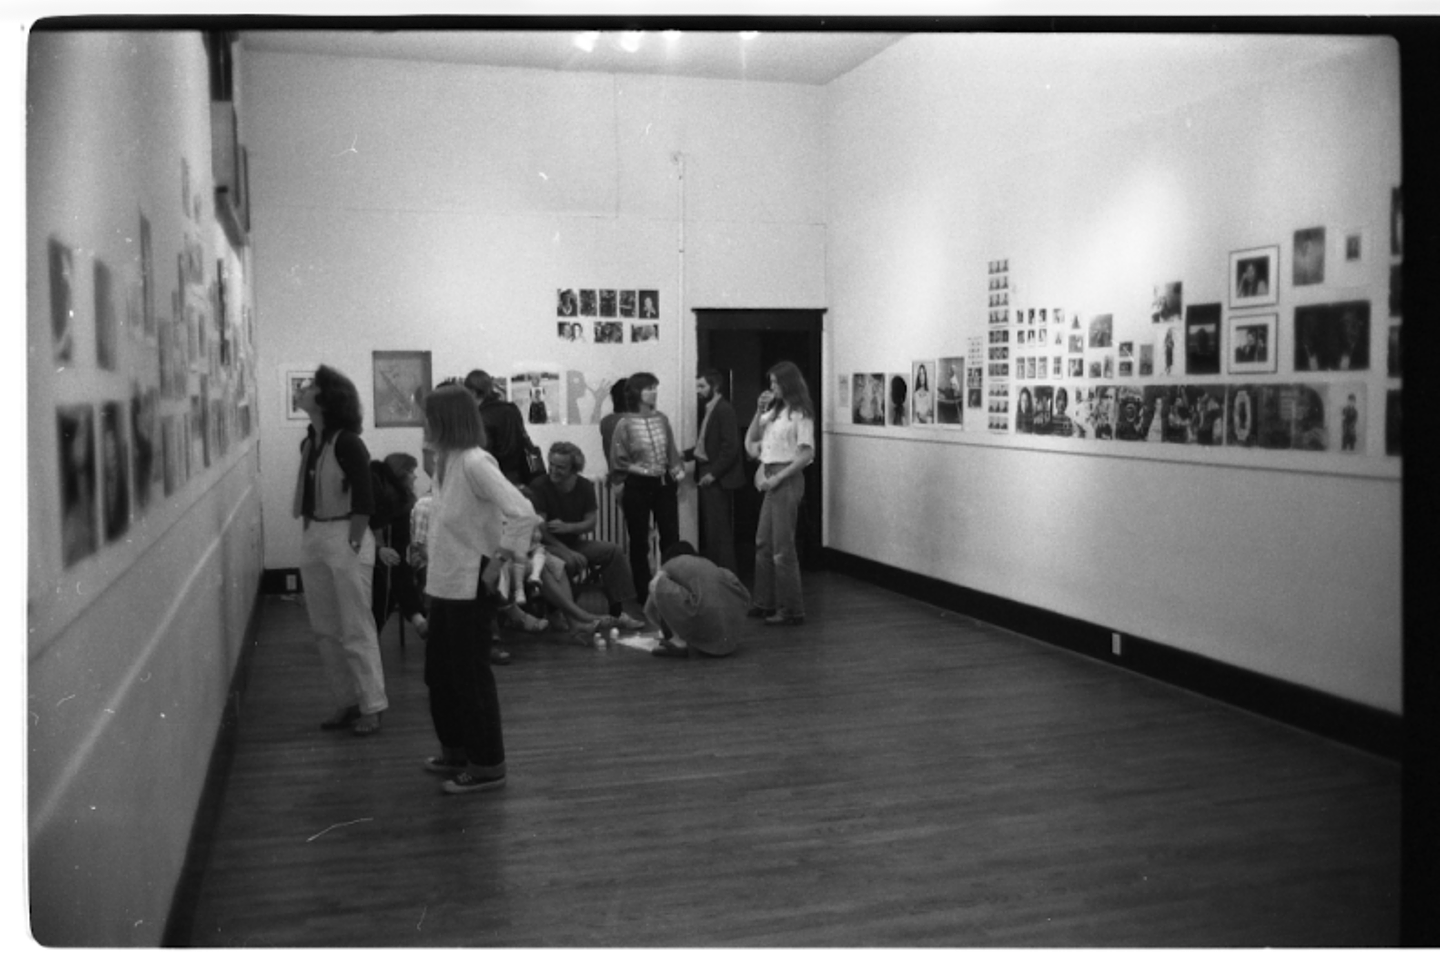 A black and white photograph of the interior of Western Front’s gallery, in which an exhibition of many photographic portraits of different sizes, tightly crowded together on the walls, is on display. There are visitors in the gallery, some looking at the work on the walls and some seated on the floor.